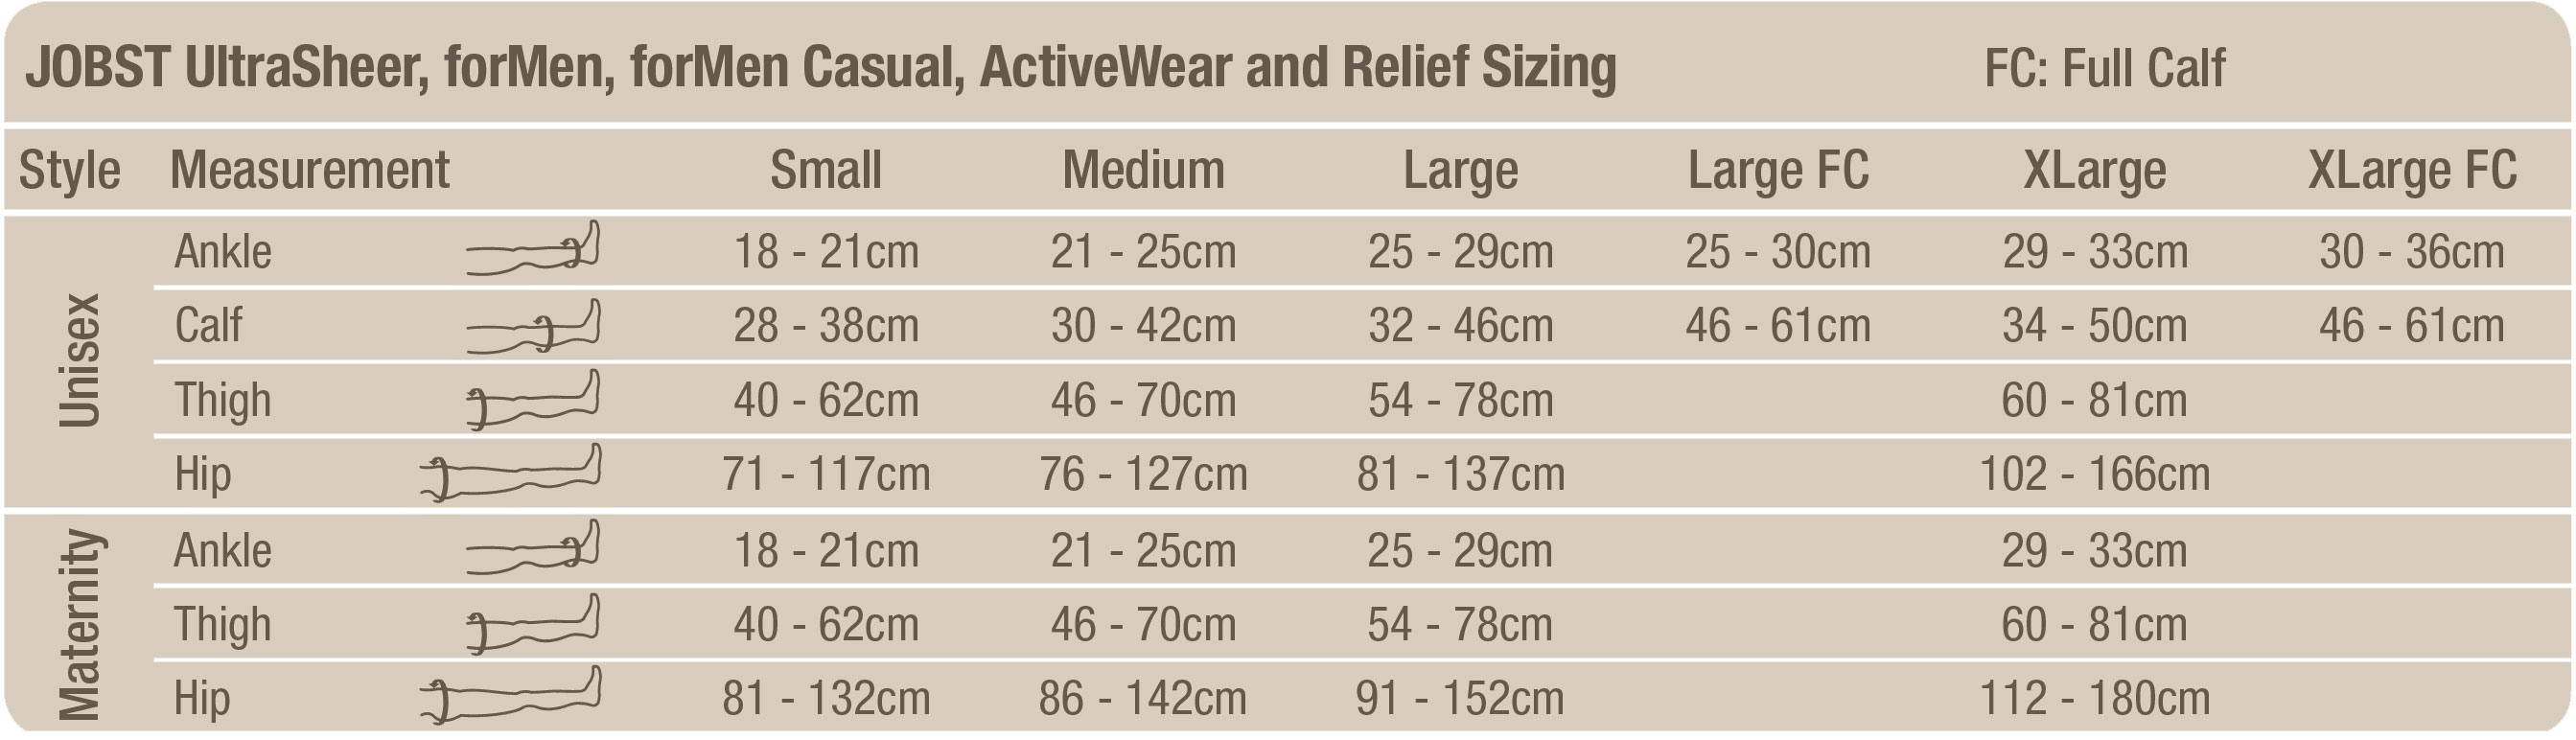 size-chart-jobst-selection-guide-new.jpg